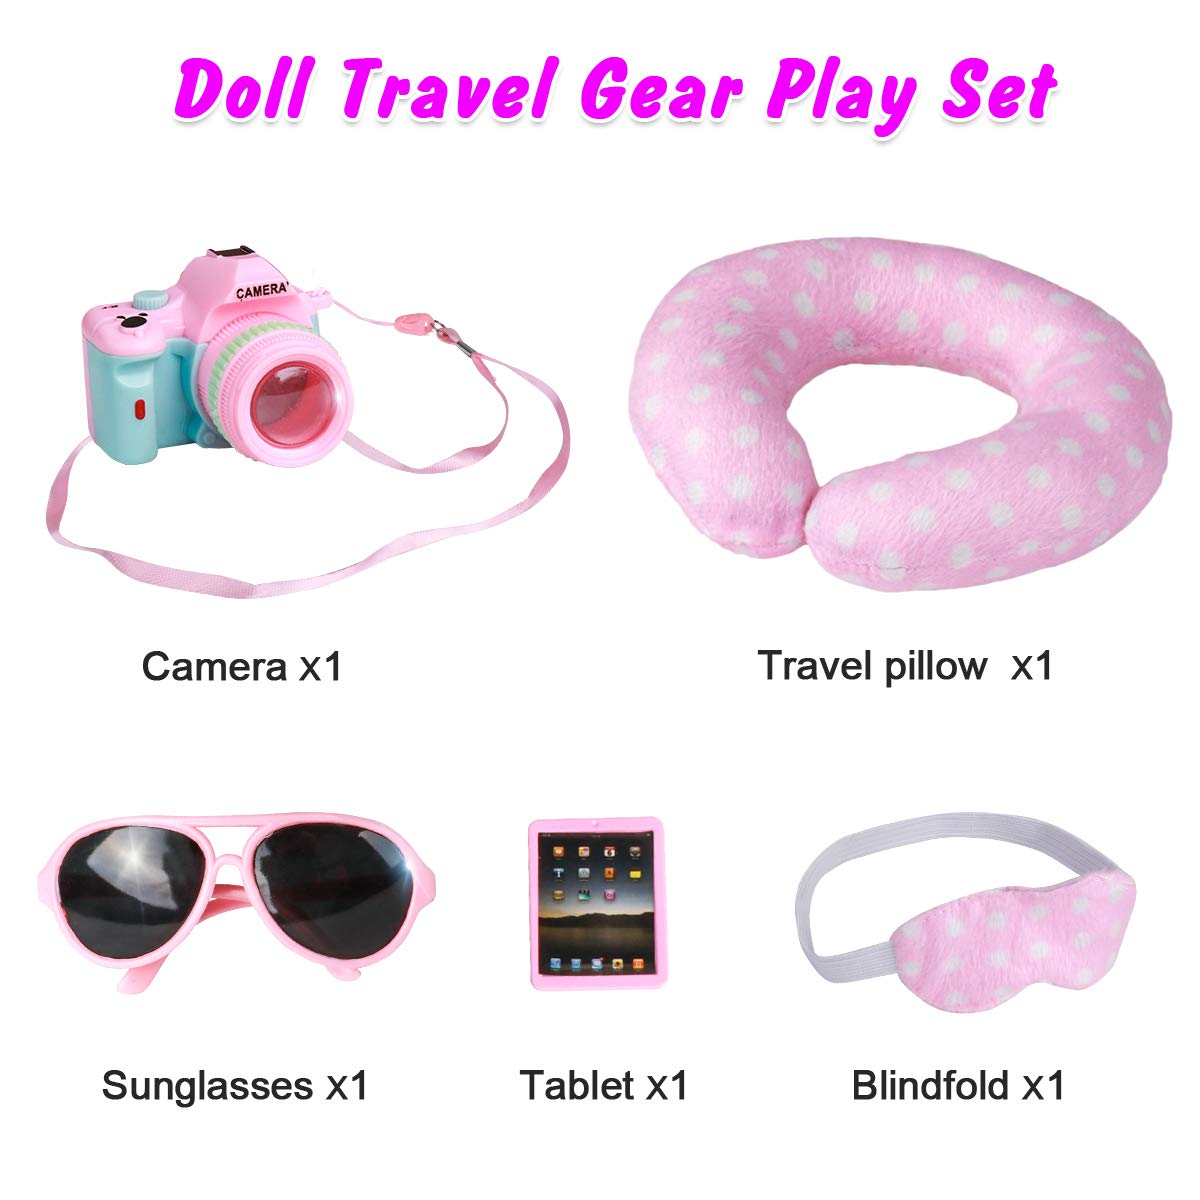 18 Inch Doll Travel Play Set - Doll Accessories with Carry on Suitcase Luggage, 3 Sets of Doll Clothes, Doll Travel Gear Play Set Fit for American Girl